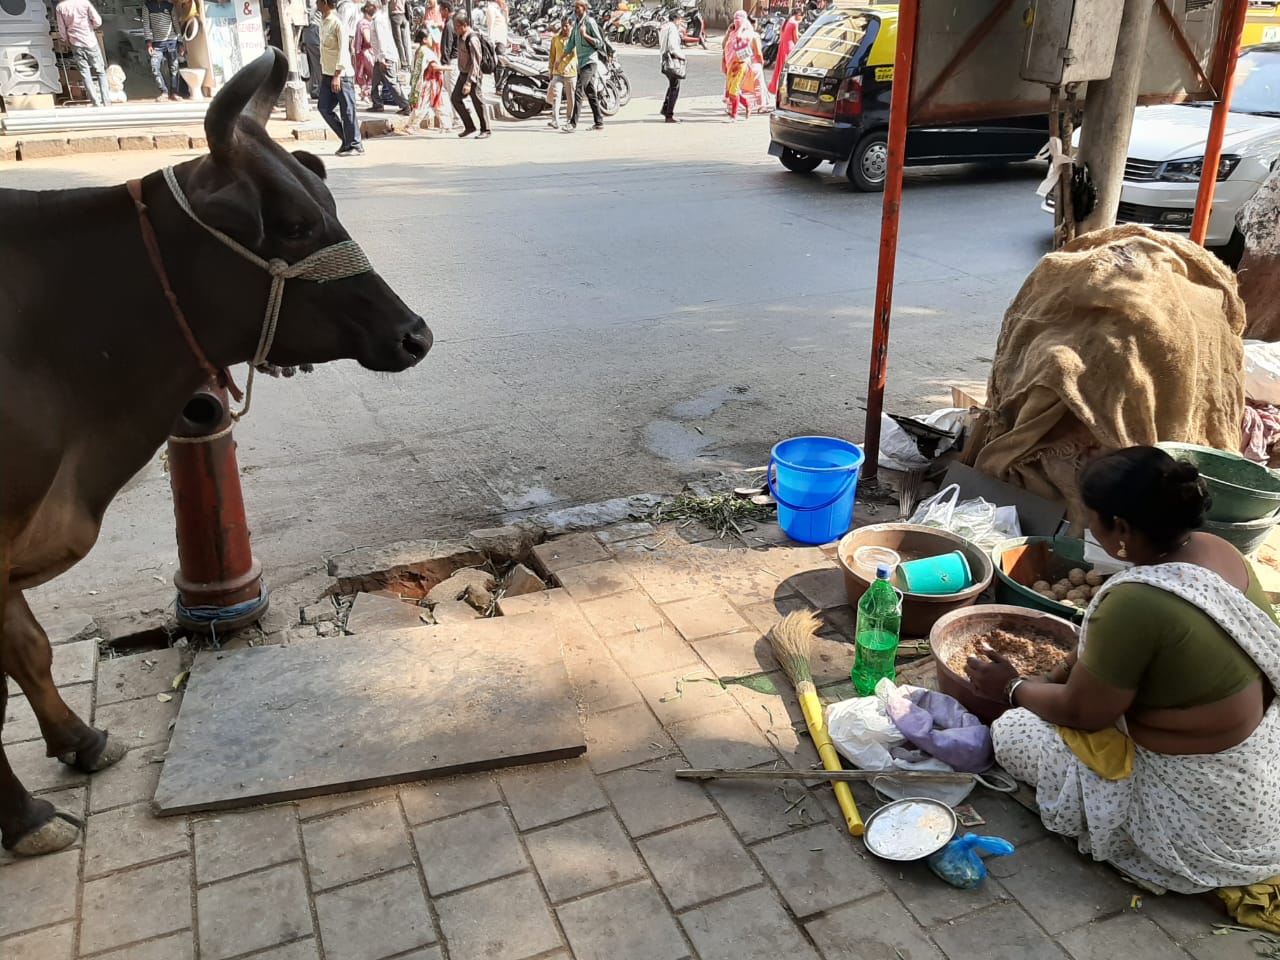 An opportunity to feed cows in Mumbai, India